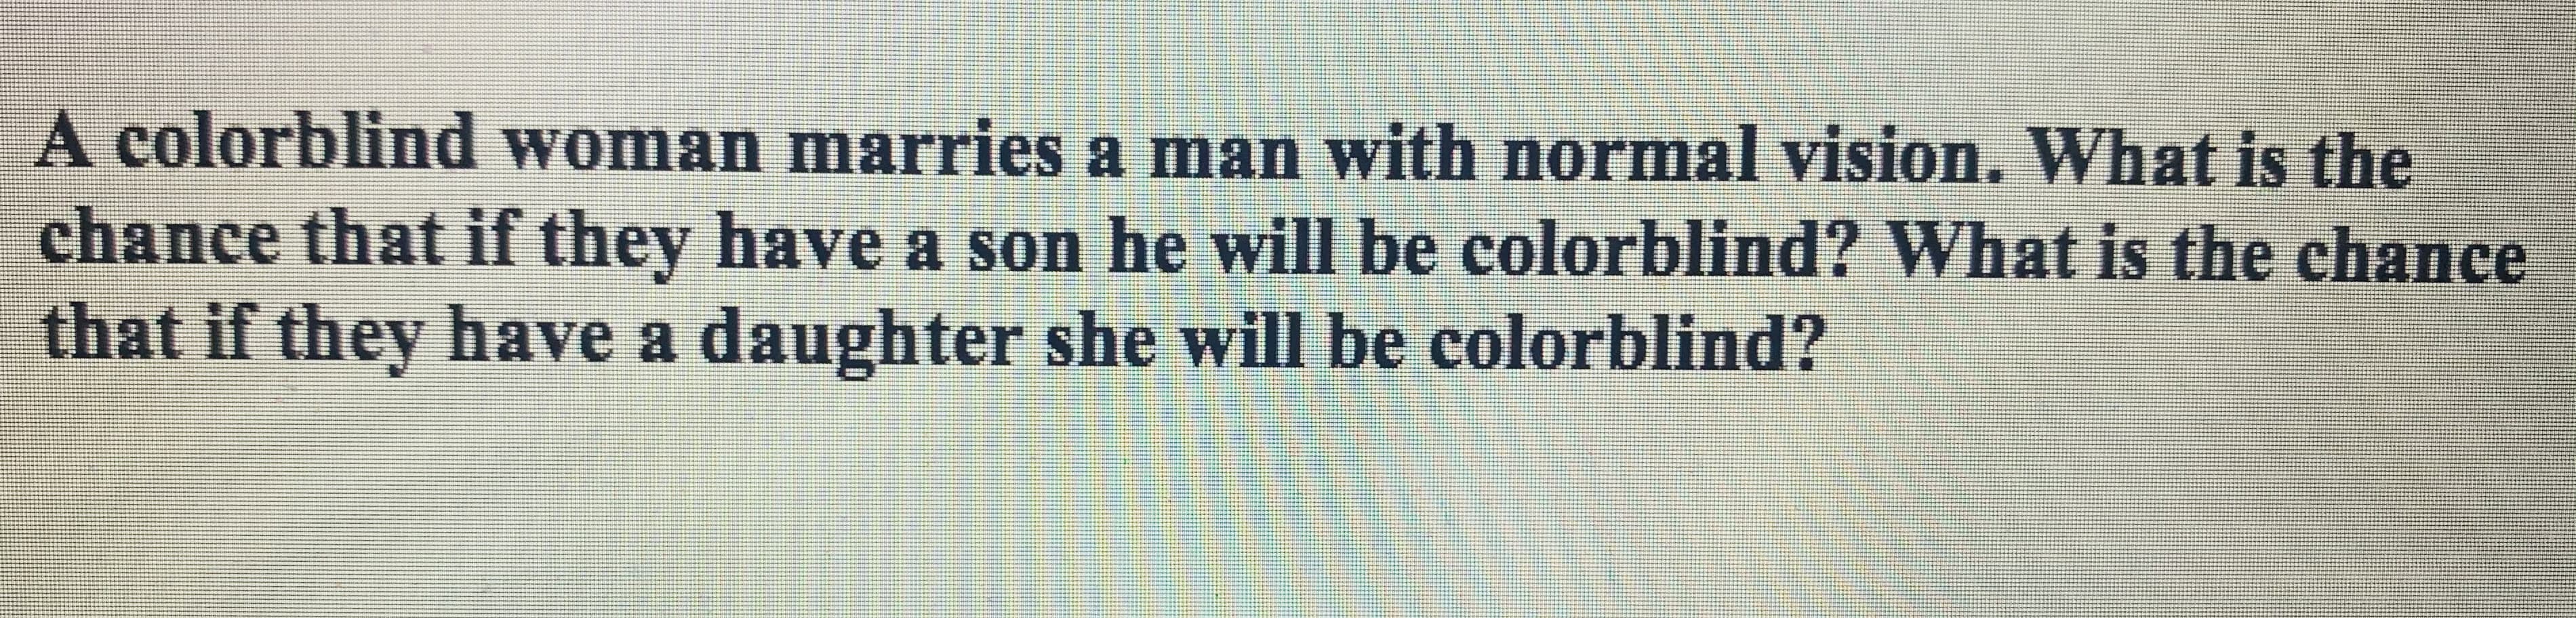 A colorblind woman marries a man with normal vision. What is the
chance that if they have a son he will be colorblind? What is the chance
that if they have a daughter she will be colorblind?
